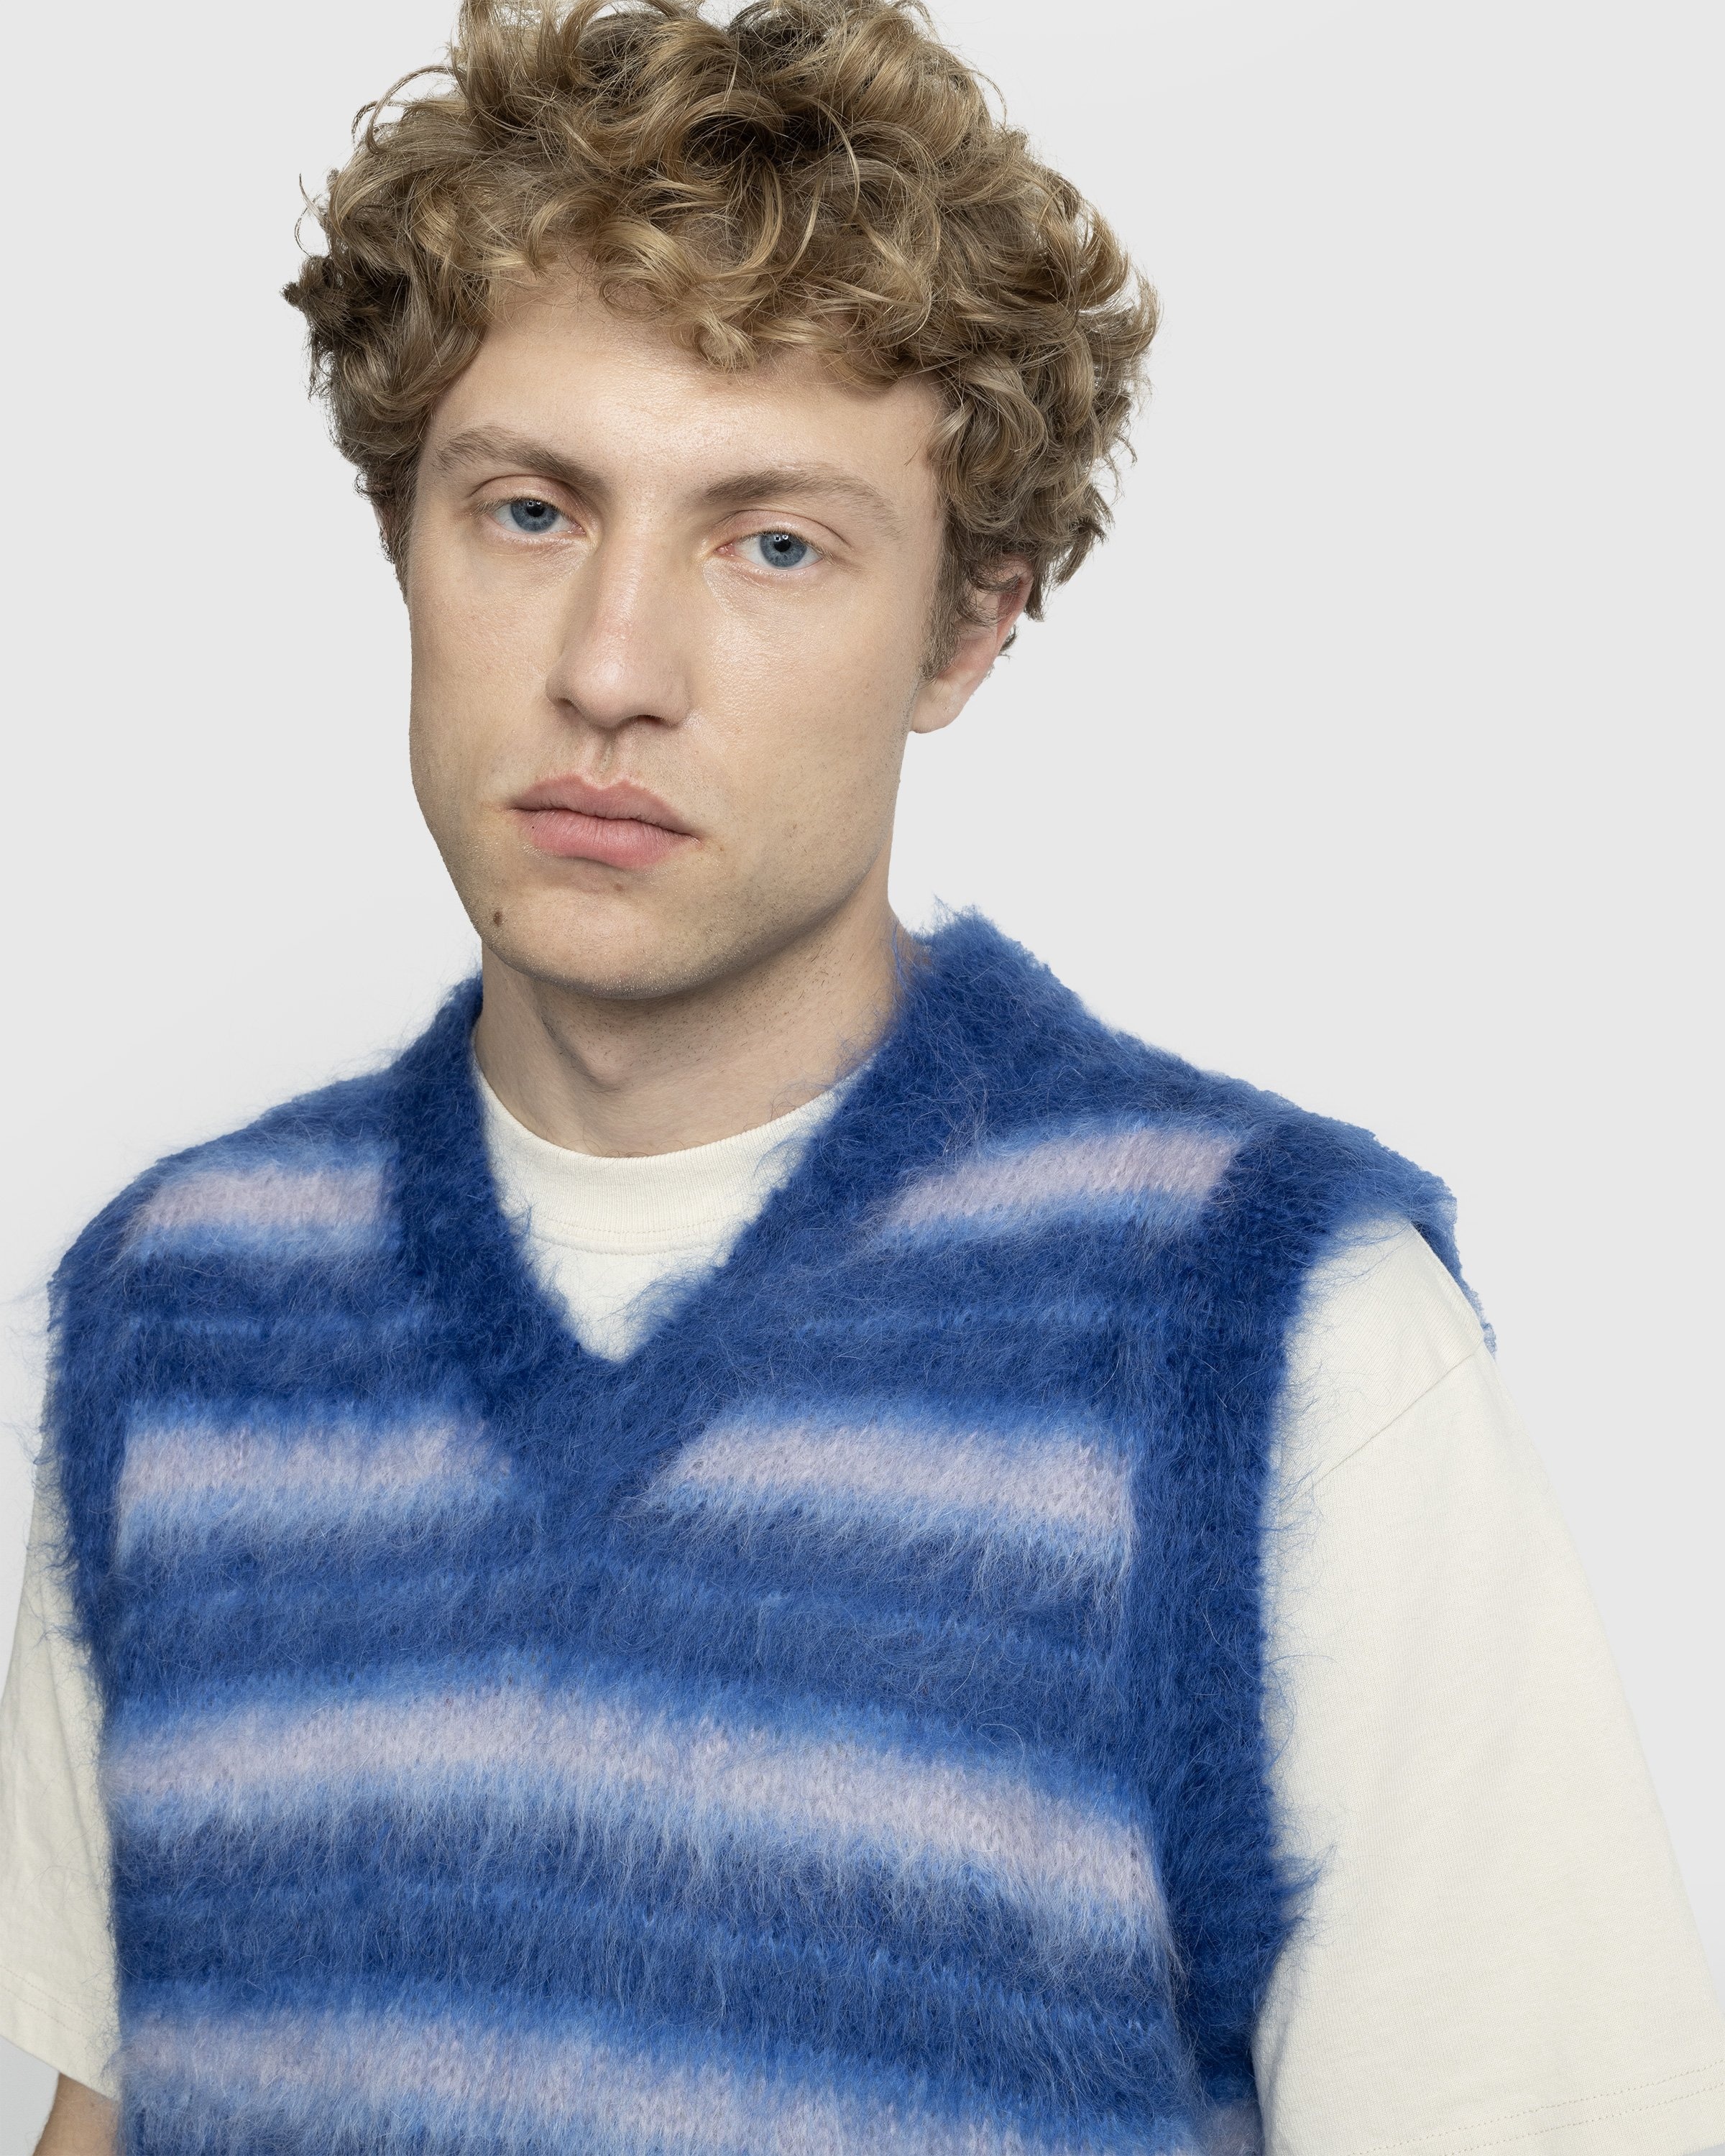 Marni Checked Wool-blend Sweater Vest In Multicolor